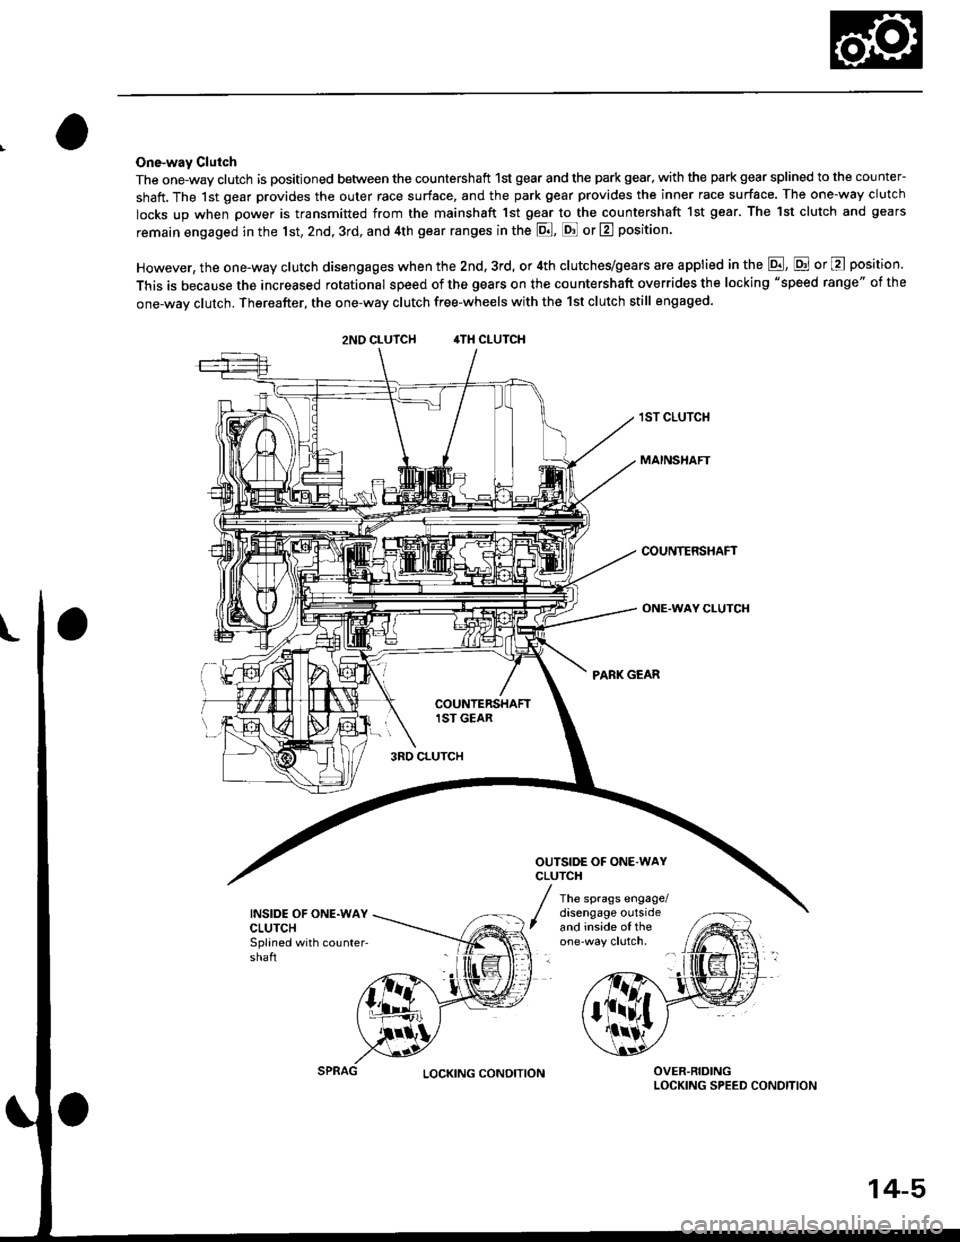 HONDA CIVIC 1996 6.G Workshop Manual One-way Clulch
The one-way clutch is positioned between the countershaft 1st gear and the park gea., with the park gear splined to the counter-
shatt, The 1st gear provides the outer race surface, and